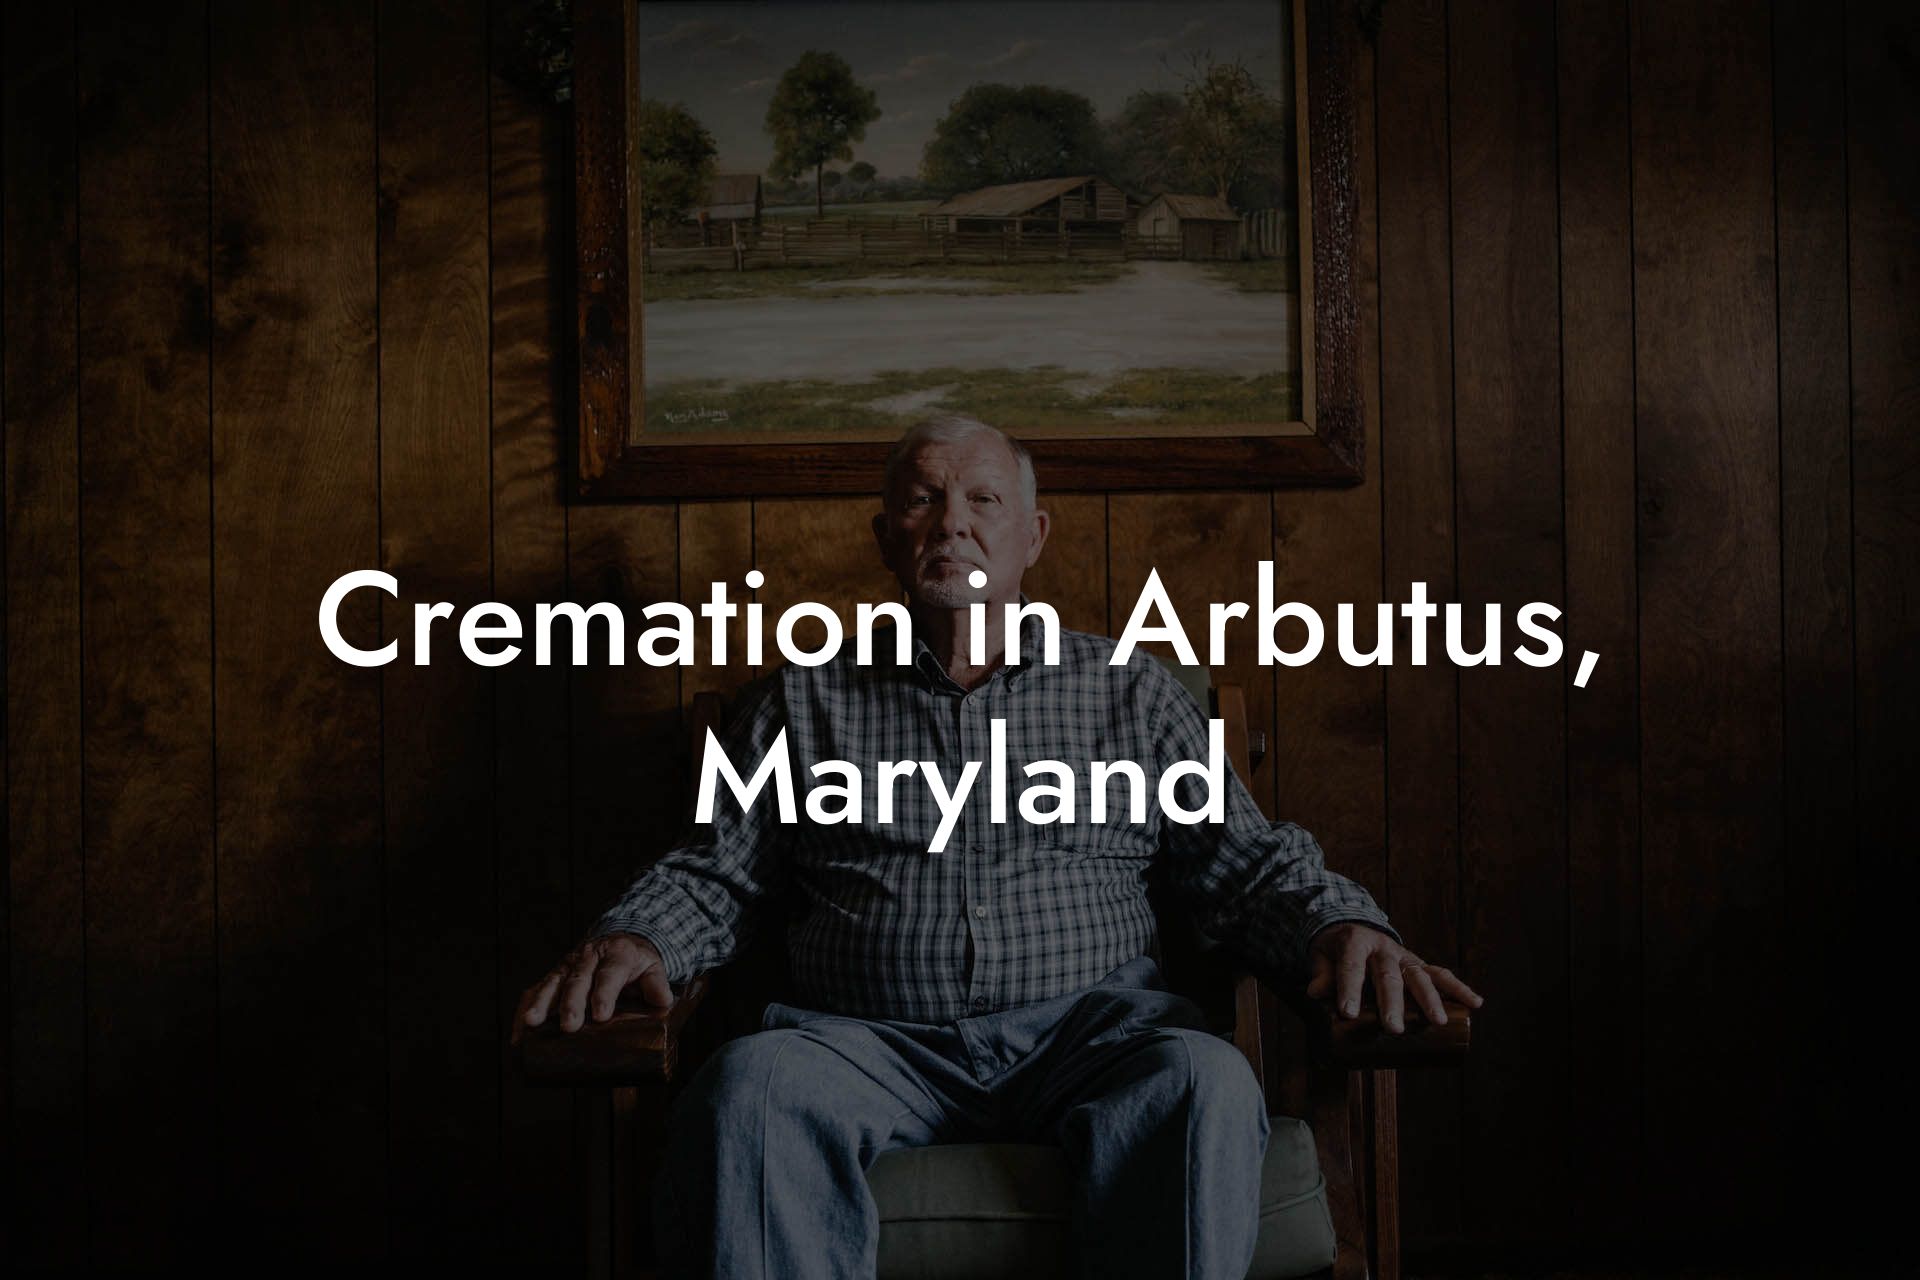 Cremation in Arbutus, Maryland